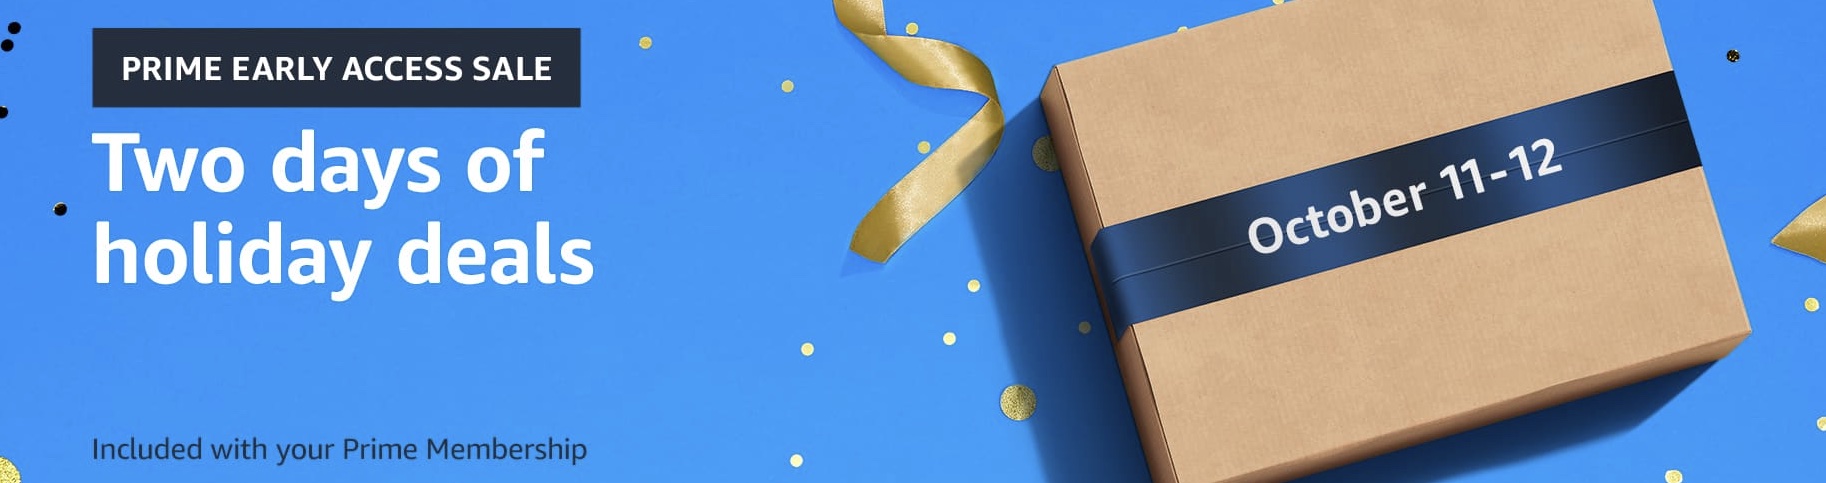 Amazon Announces Prime Day Follow-Up Event Coming in October